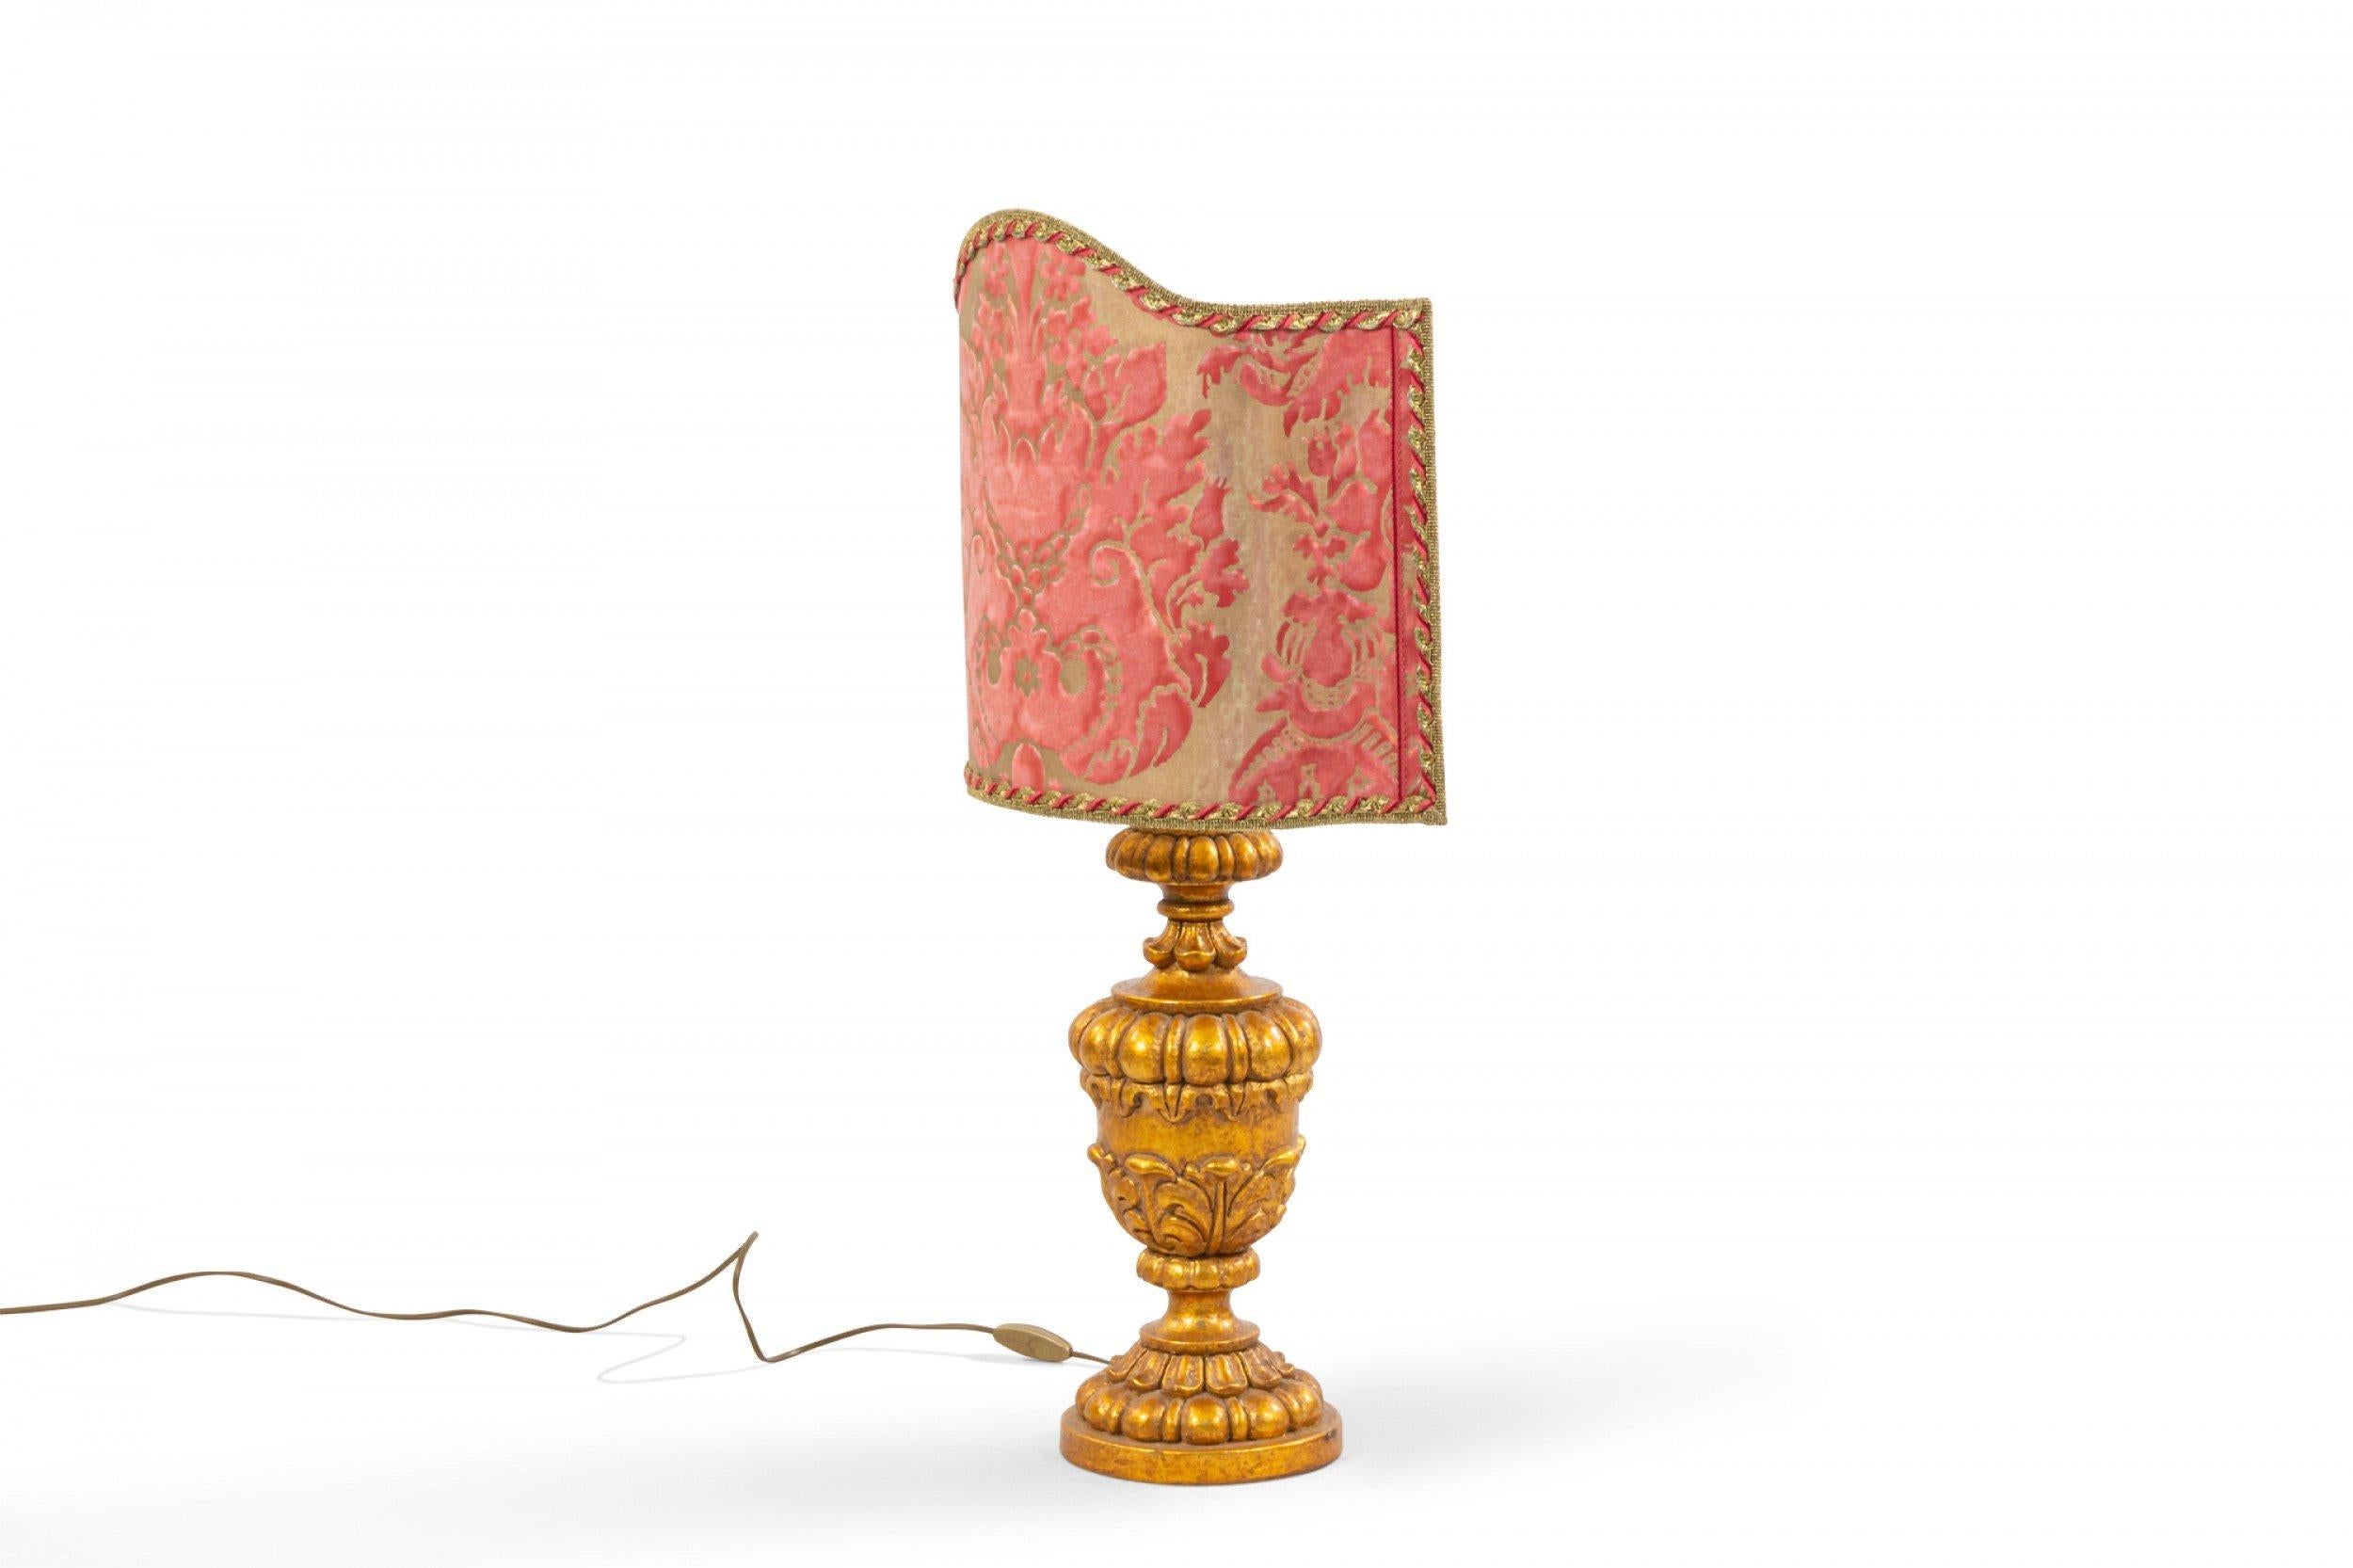 Pair of Italian Rococo style (20th Century) gilt carved table lamps with pink & beige quilted damask shaped top half-shades (PRICED AS PAIR).